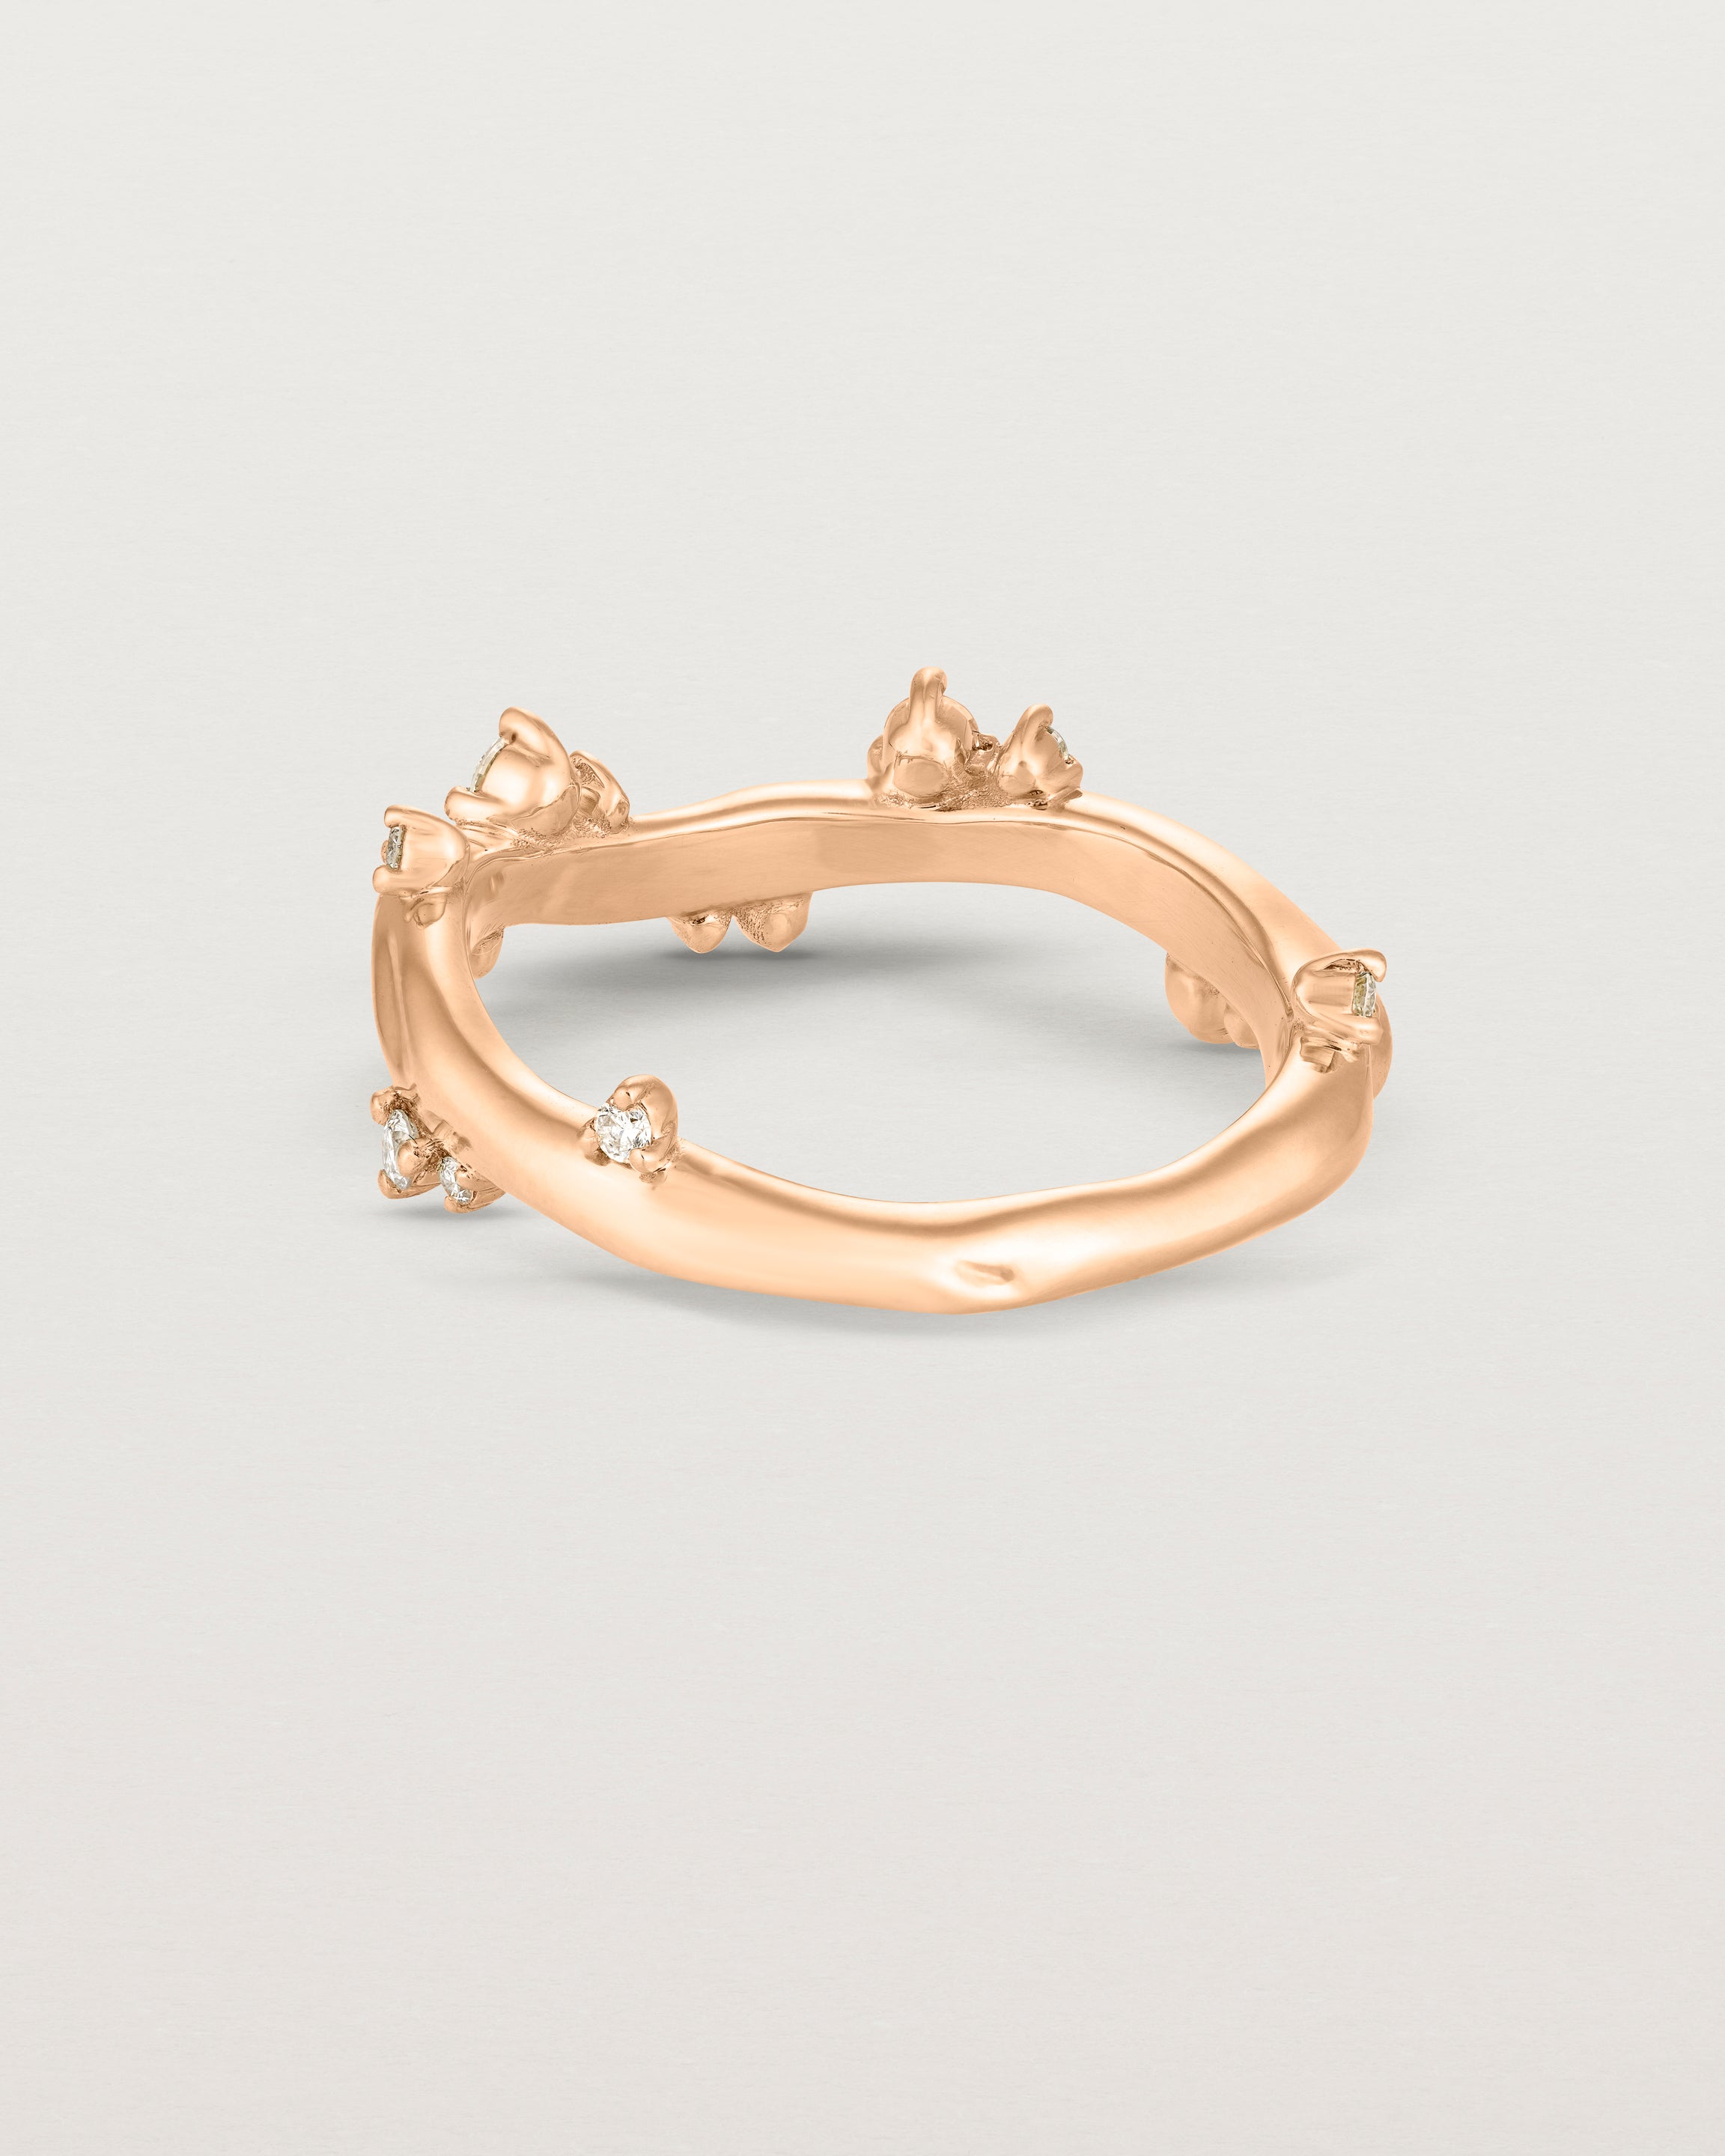 Product photo of the back in rose gold Ember ring with white diamonds scattered around the band.